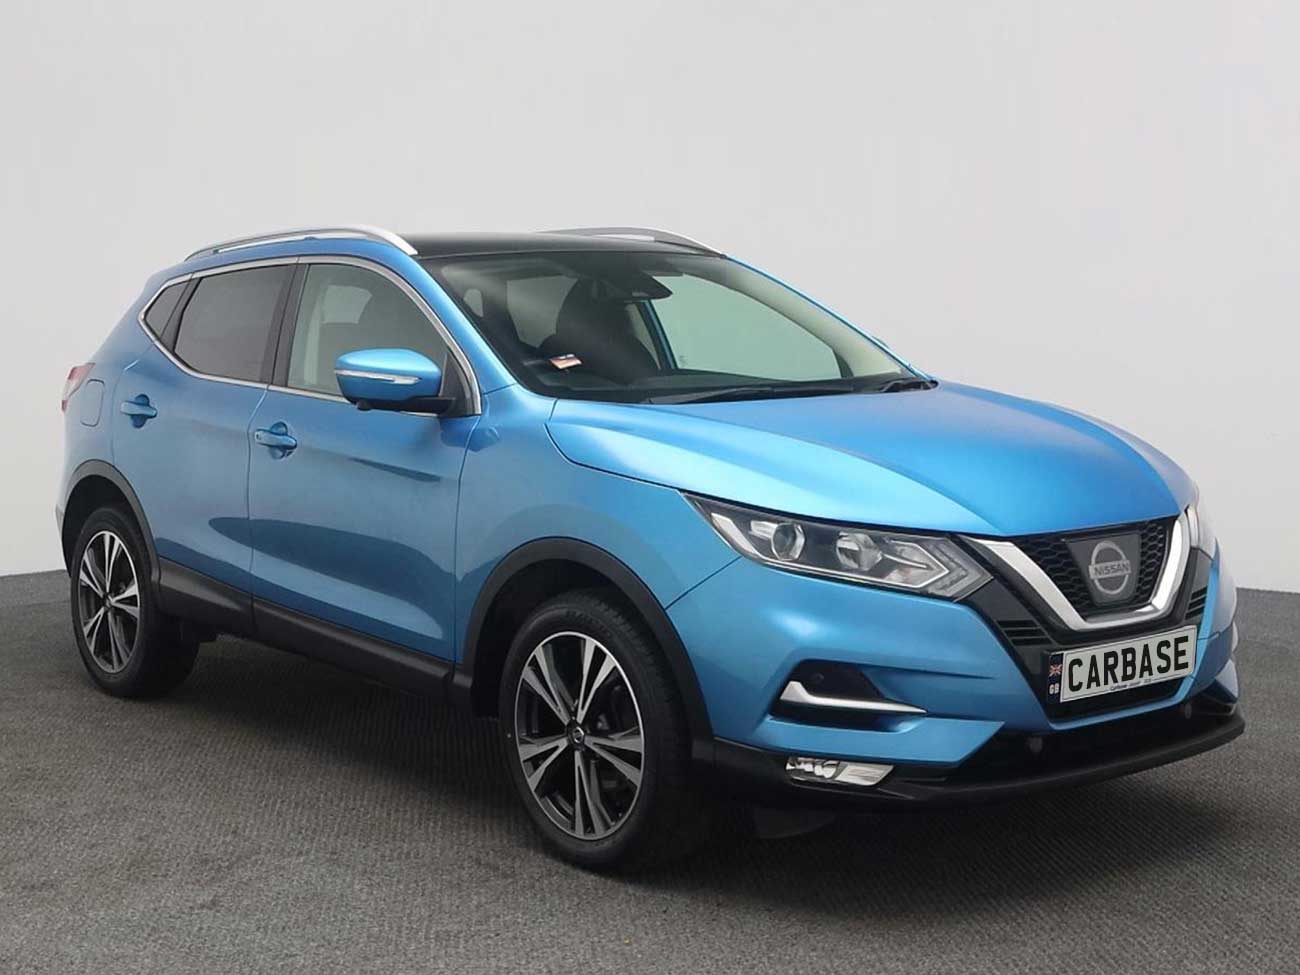 Nissan Qashqai front view in showroom